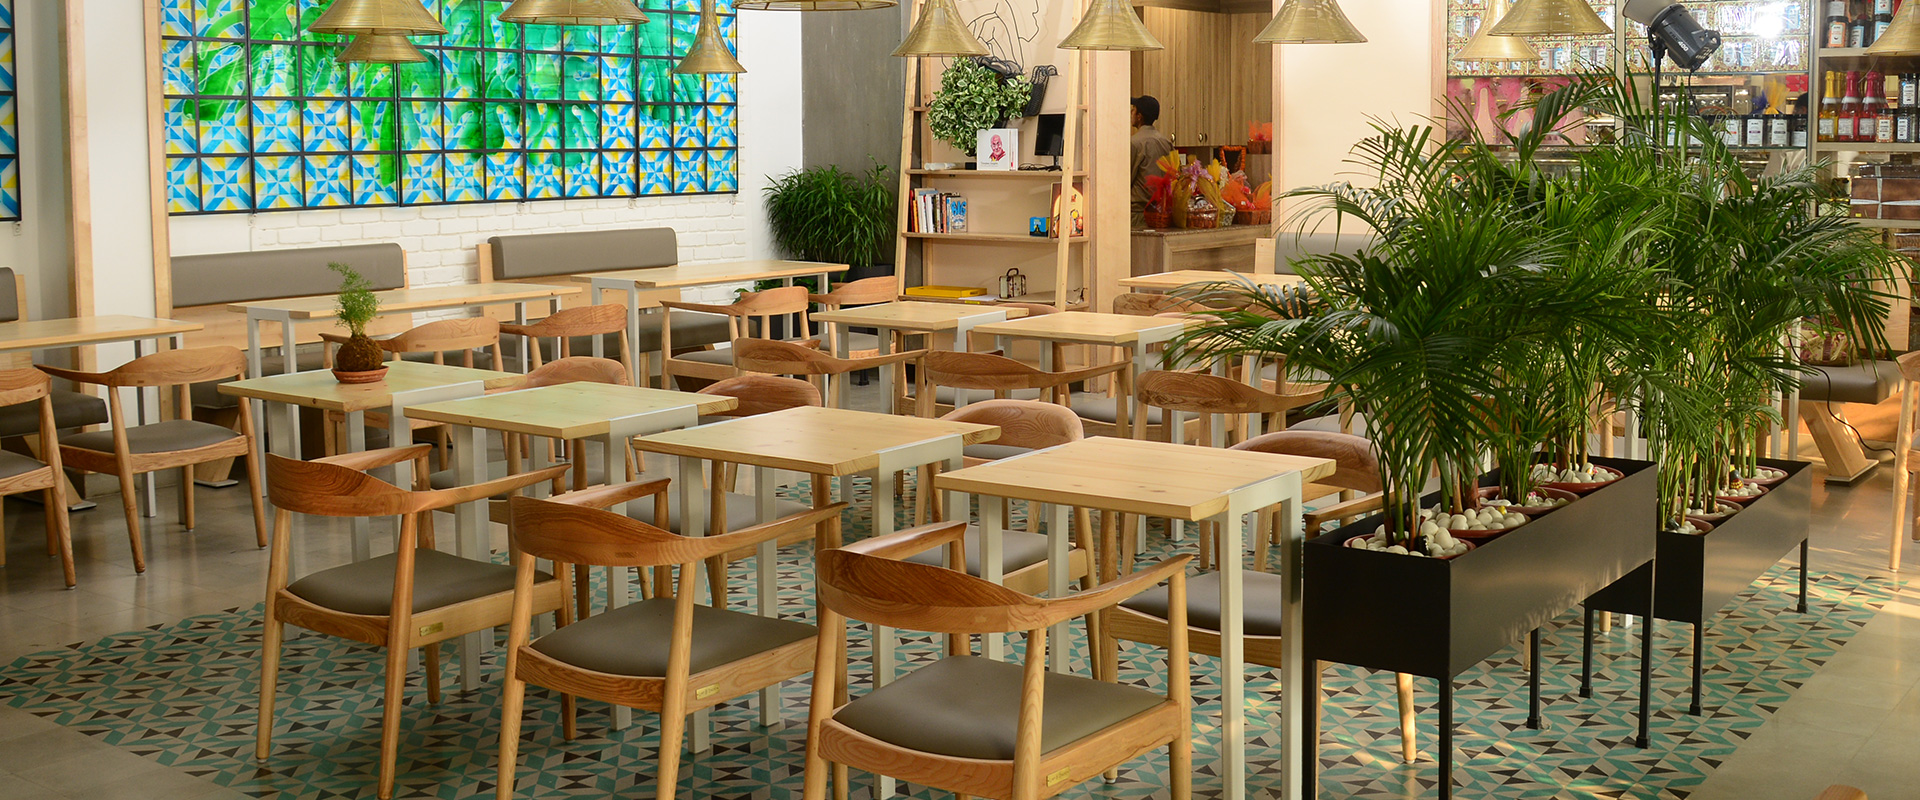 Lap and Dado Furniture for Alma Bakery - Custom made Booth seating, Cafe Tables and Kennedy Chairs